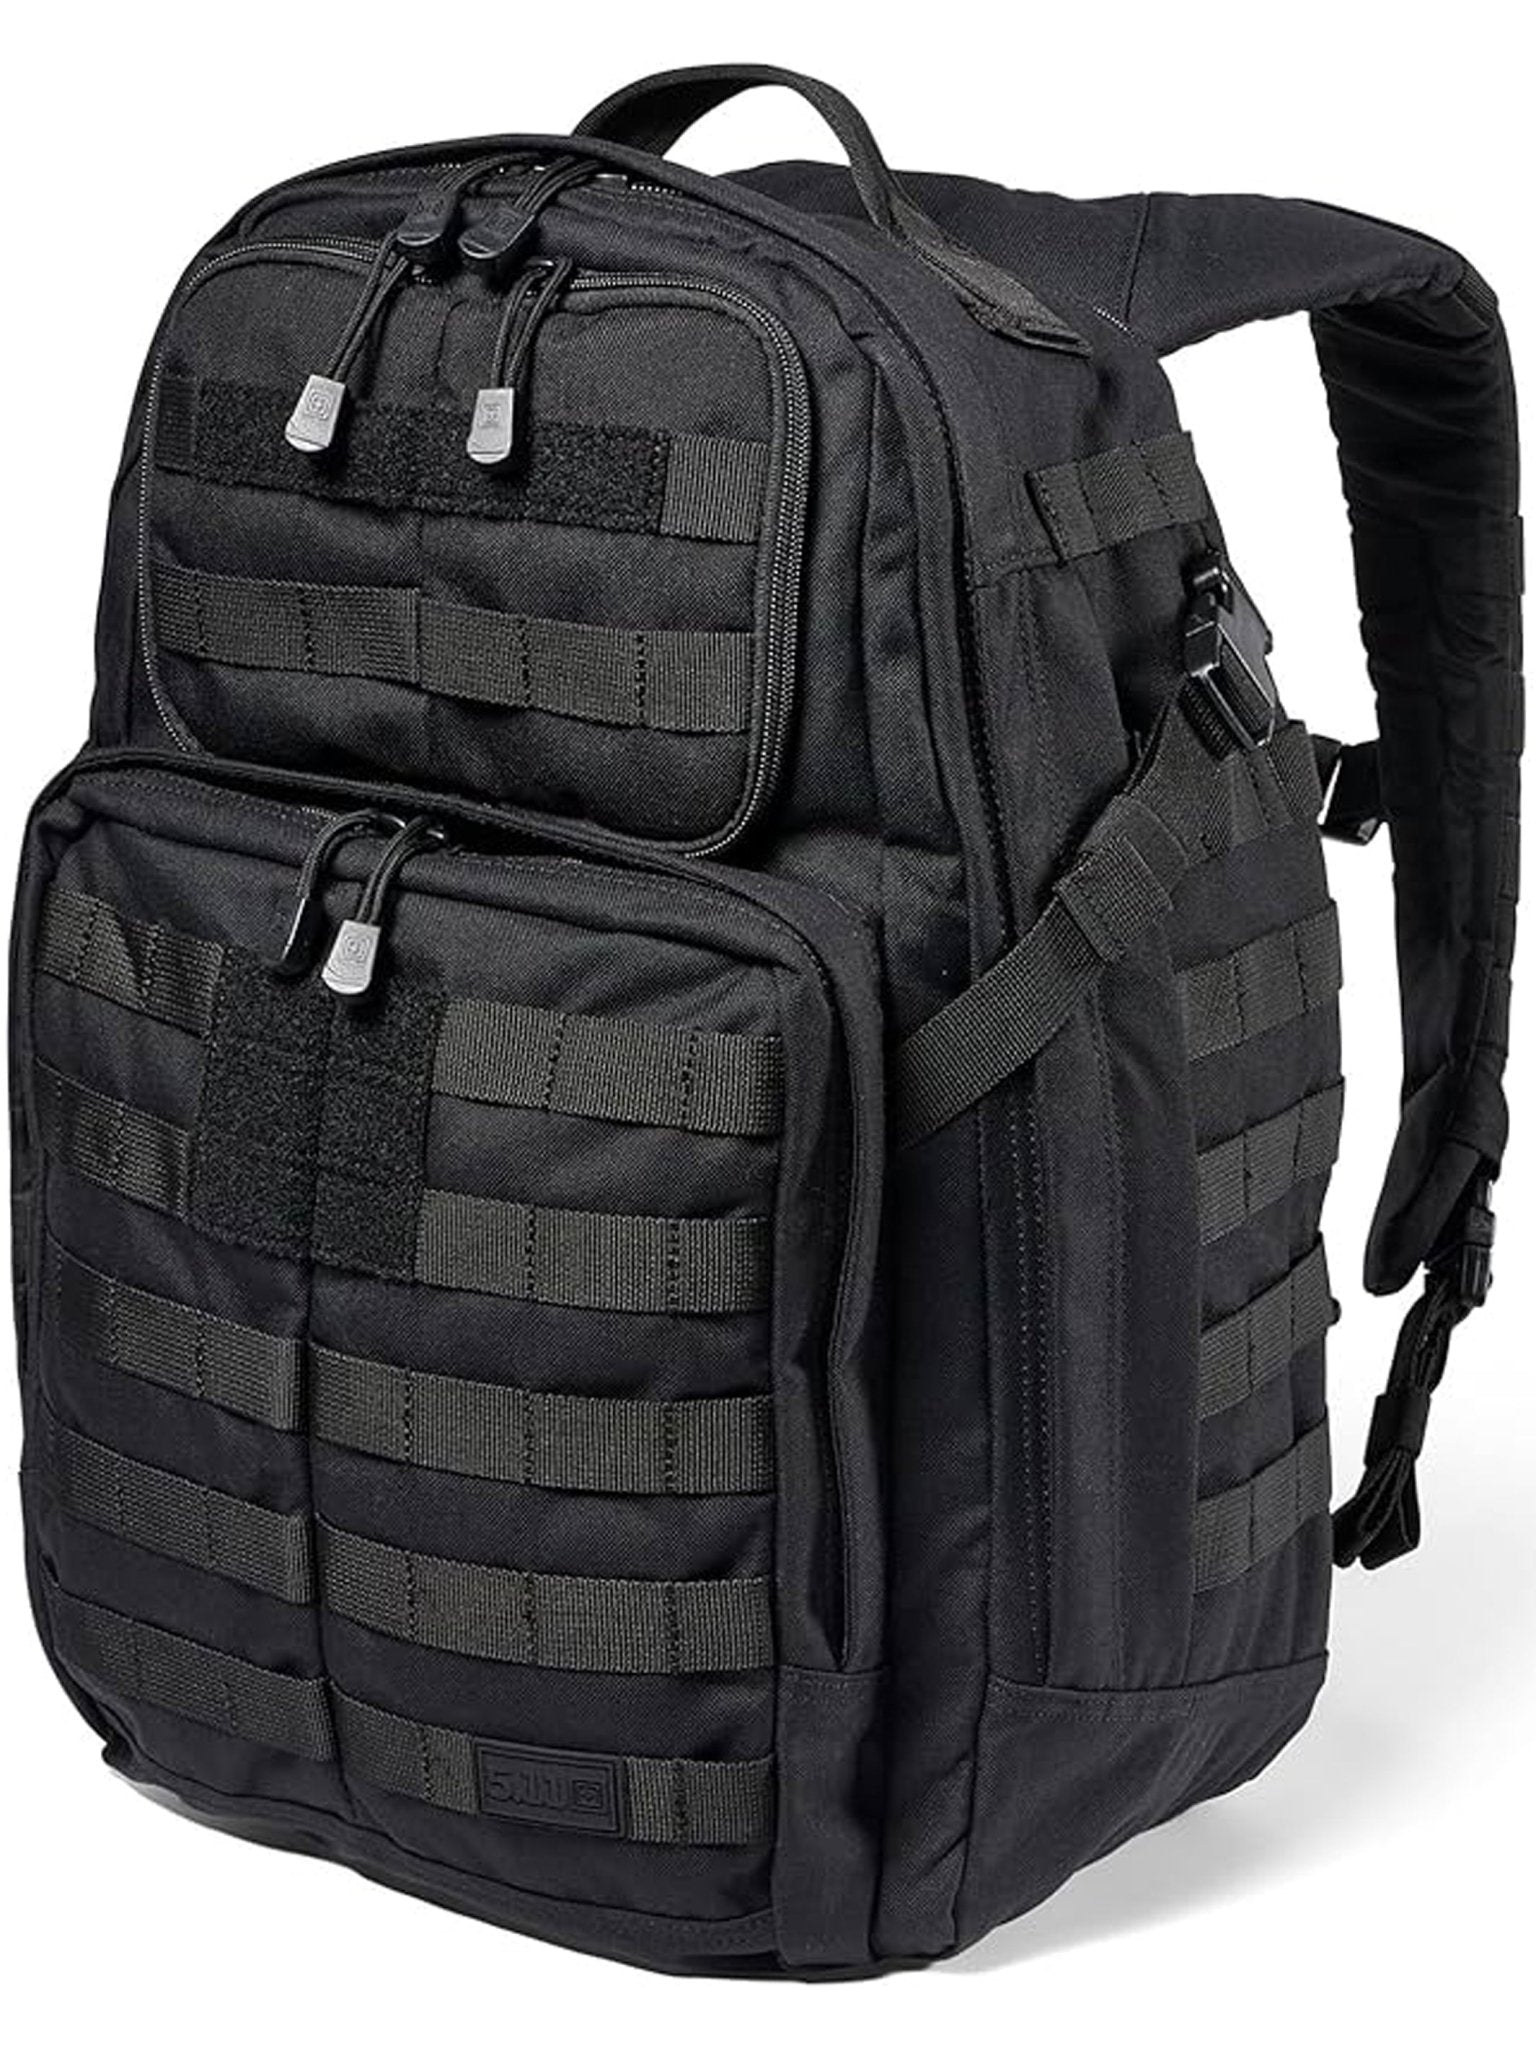 4elementsclothing5.11 Tactical5.11 Tactical - 5.11 Tactical Rush 24 2.0 Backpack - Style 56563Bag56563-019